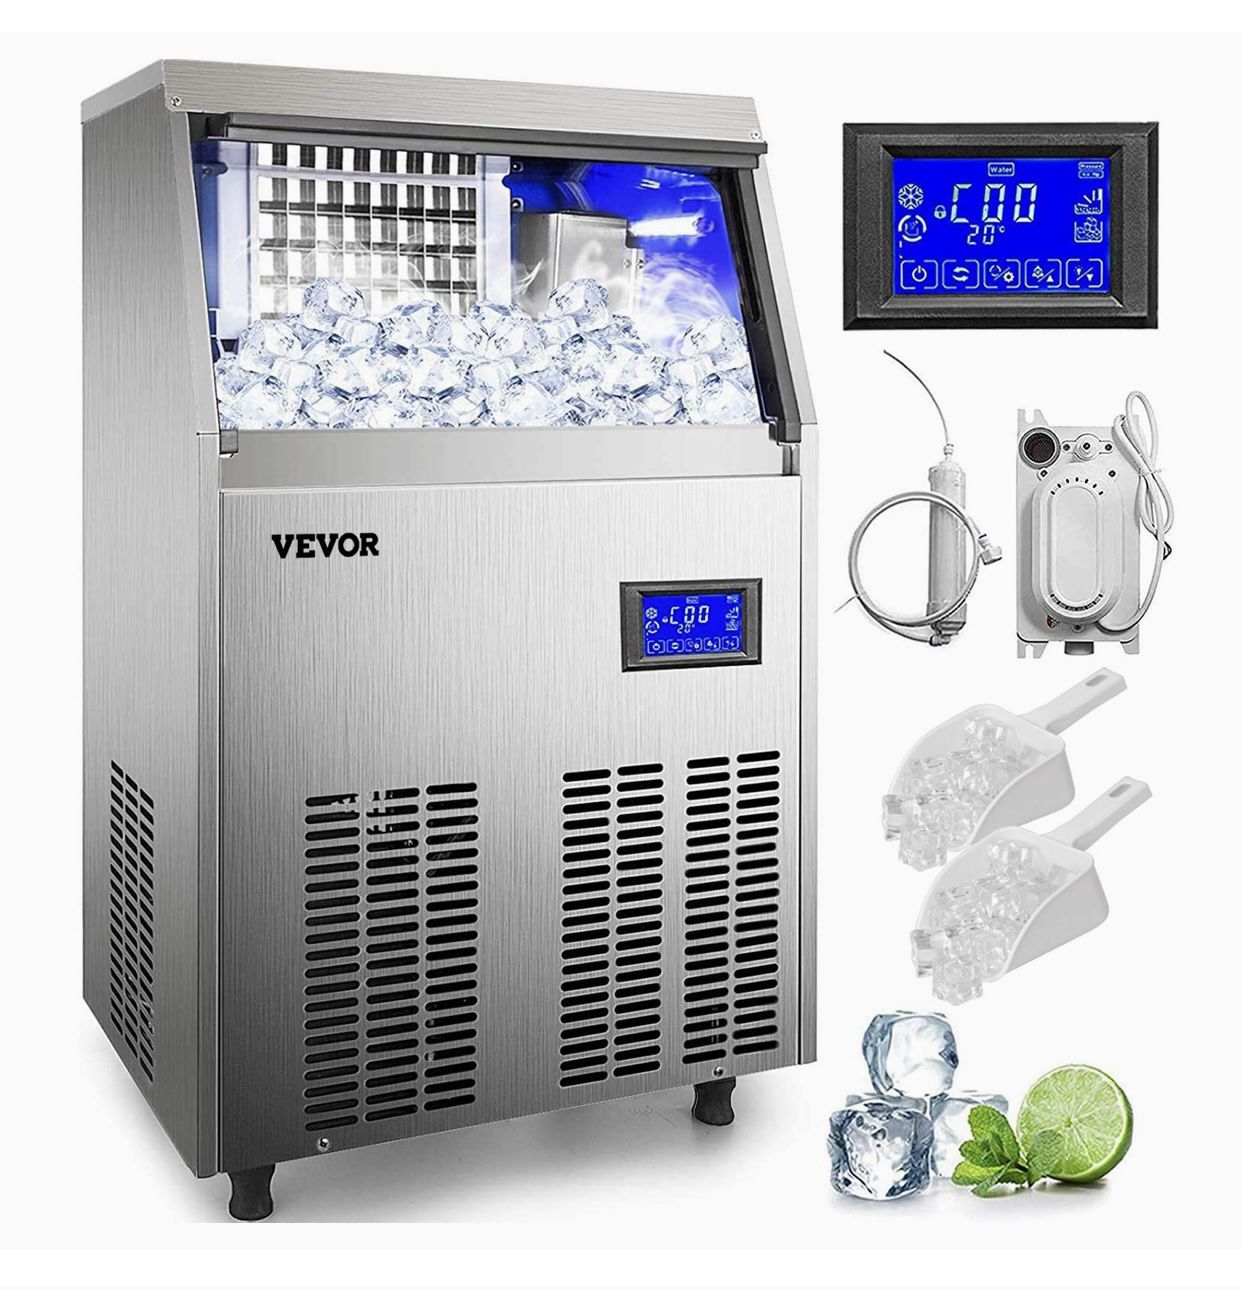 Commercial Ice Maker, Ice Making Machine, Ice Machine, 100-110LBS/24H with 33LBS Storage Bin